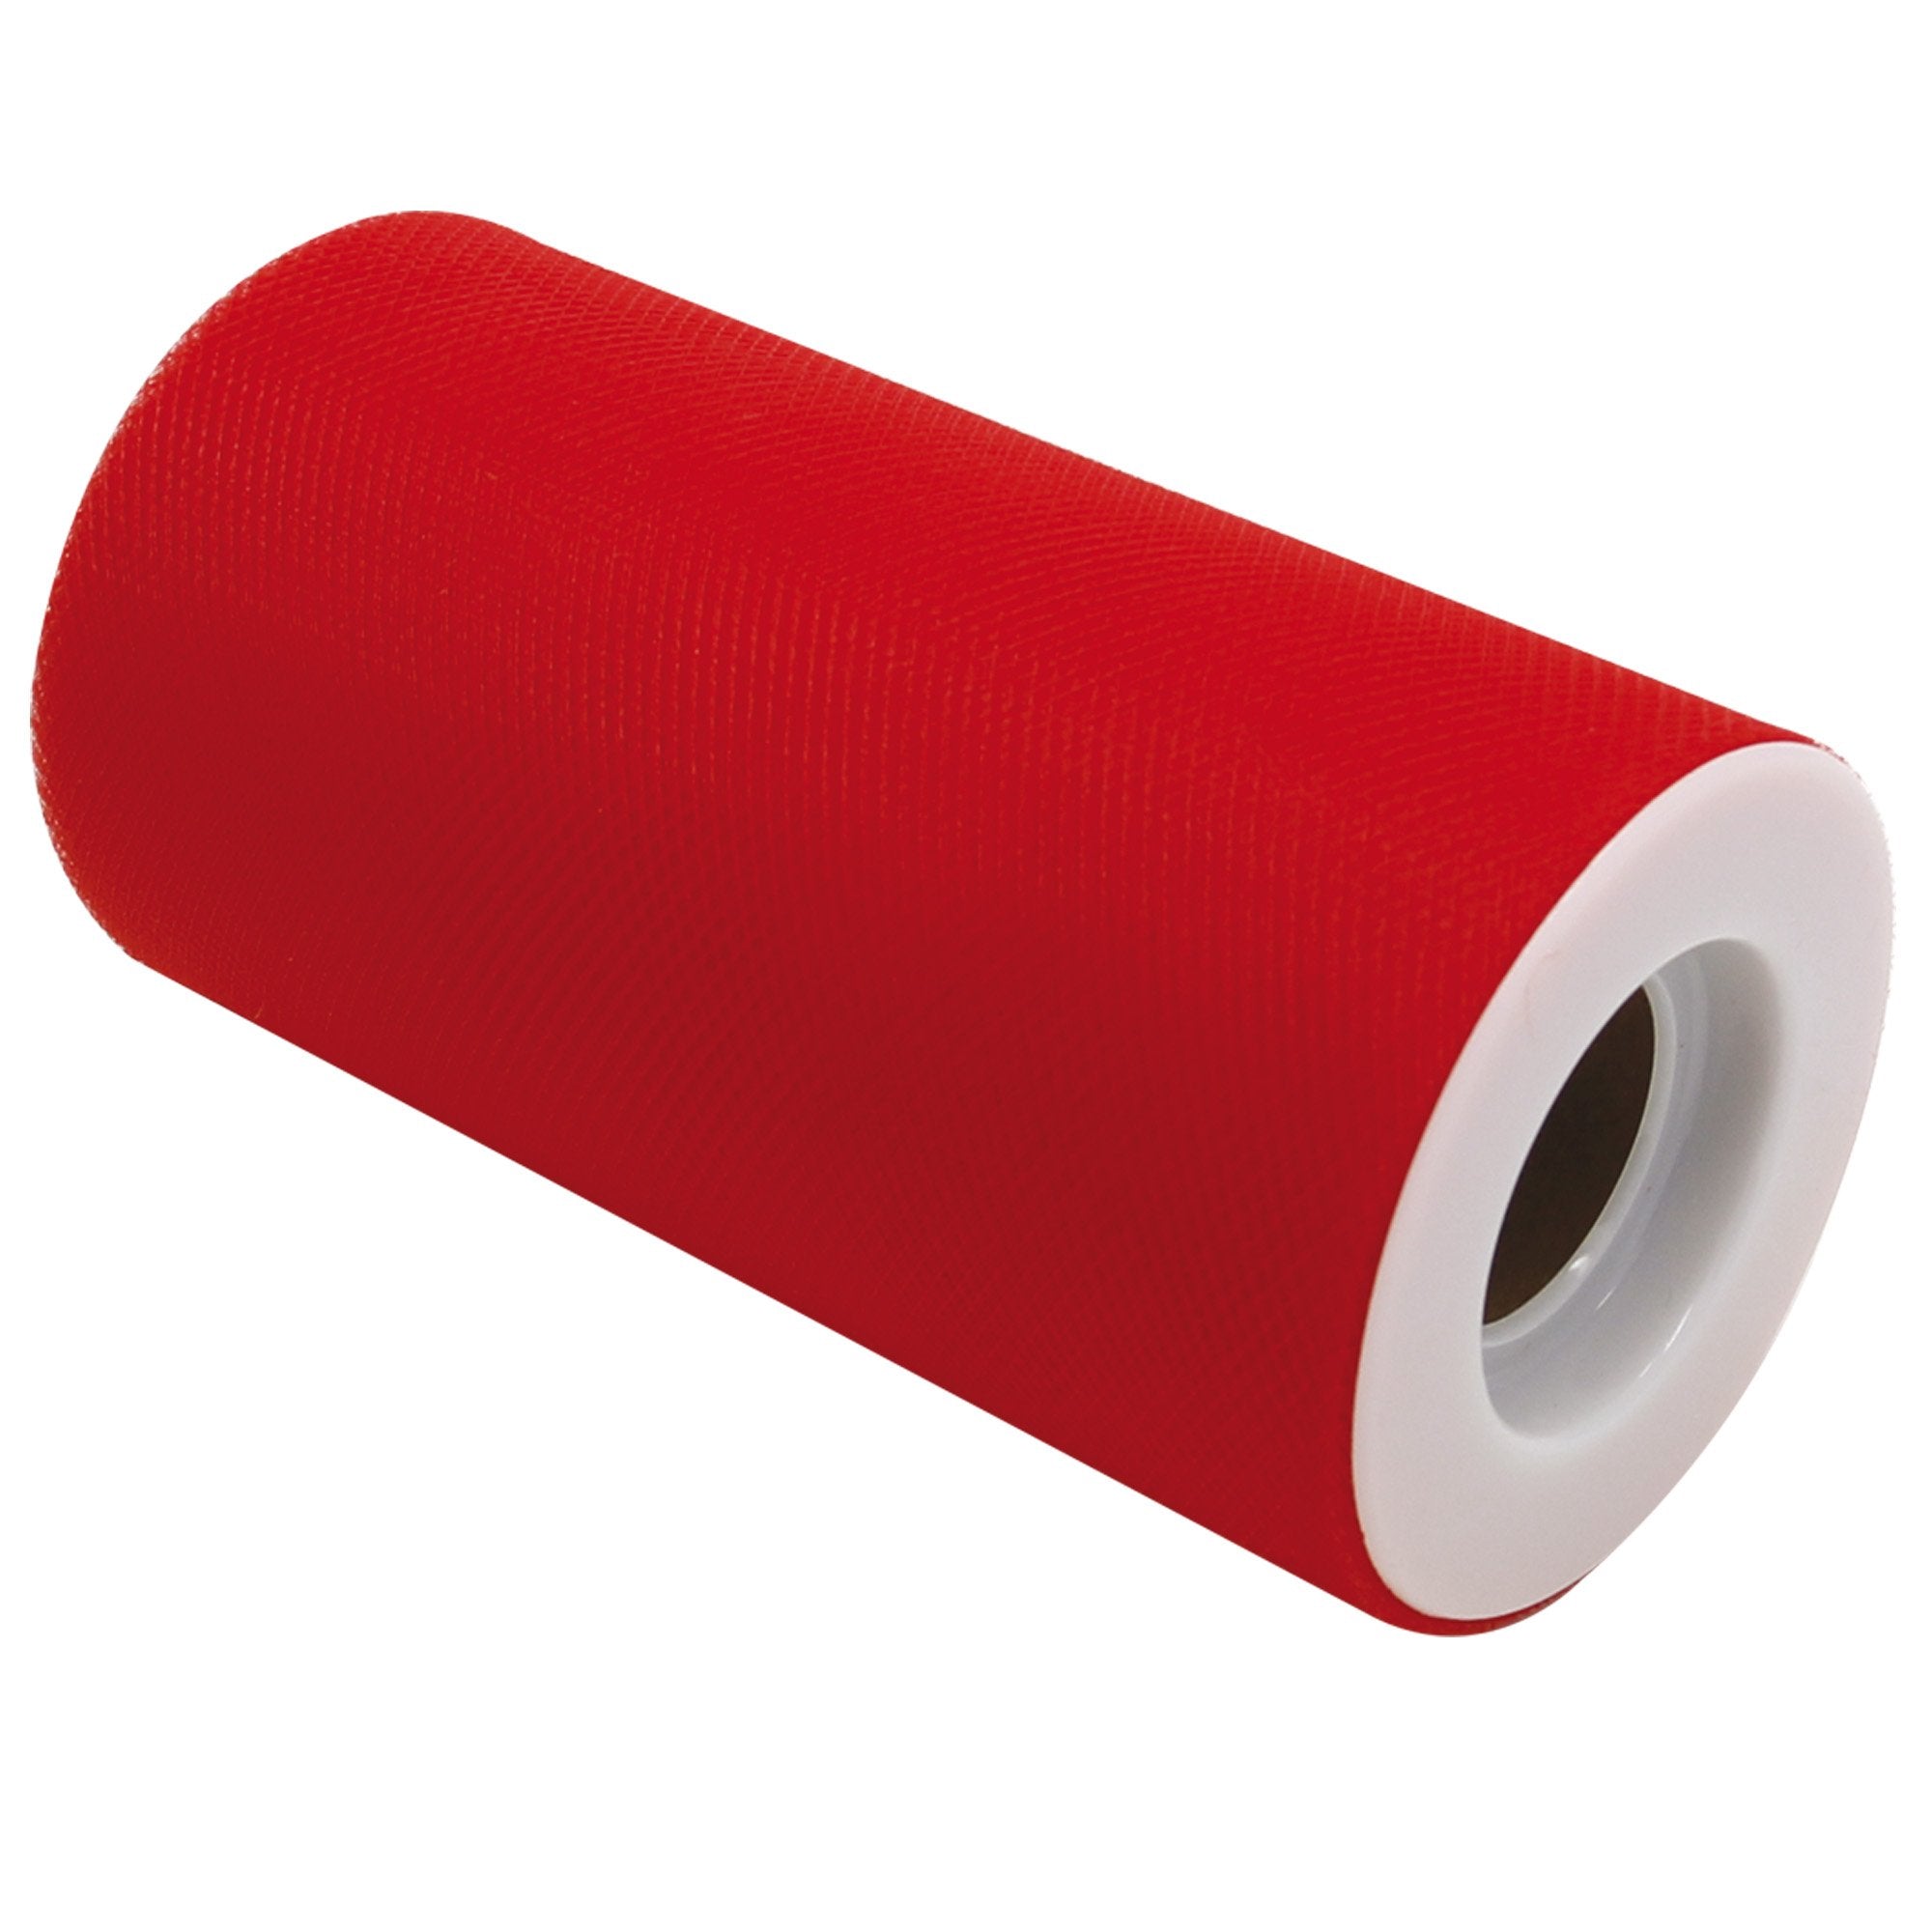 big-party-tulle-rotolo-12-5cmx25mt-rosso